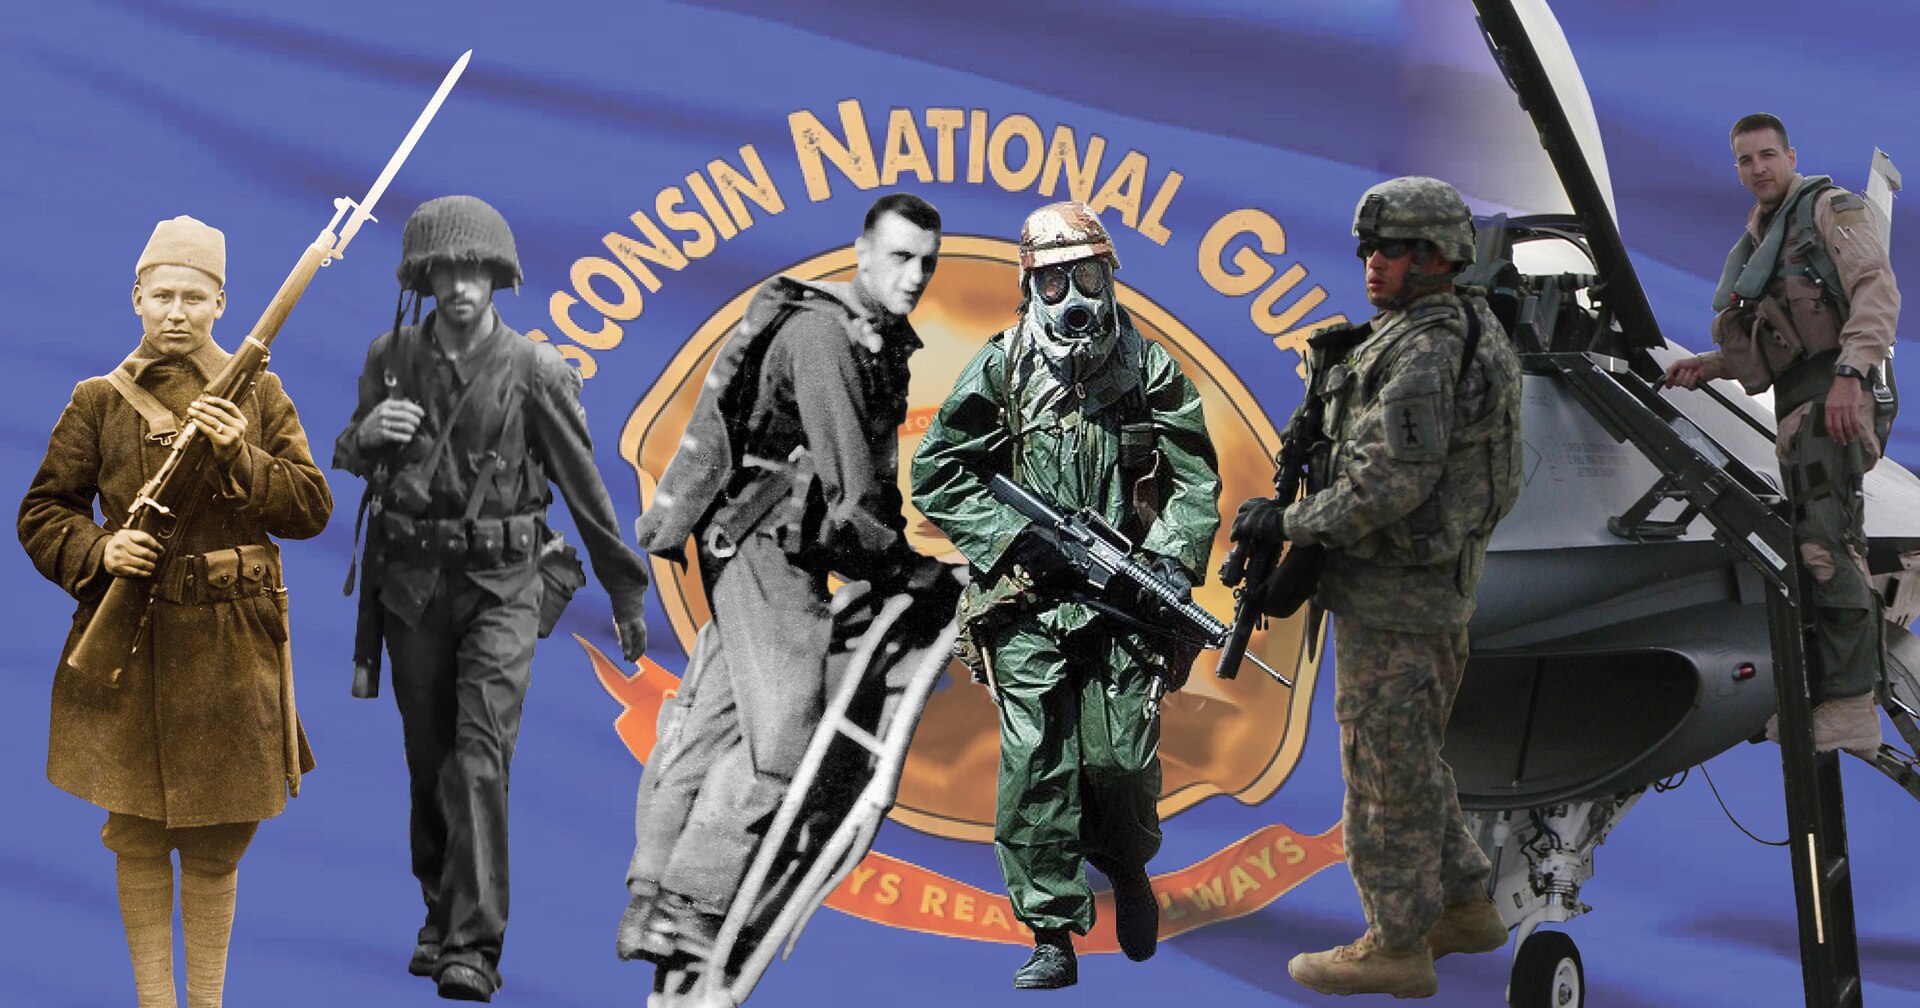 Wisconsin National Guard Soldiers and Airmen have a long history of contributing to the U.S. military.